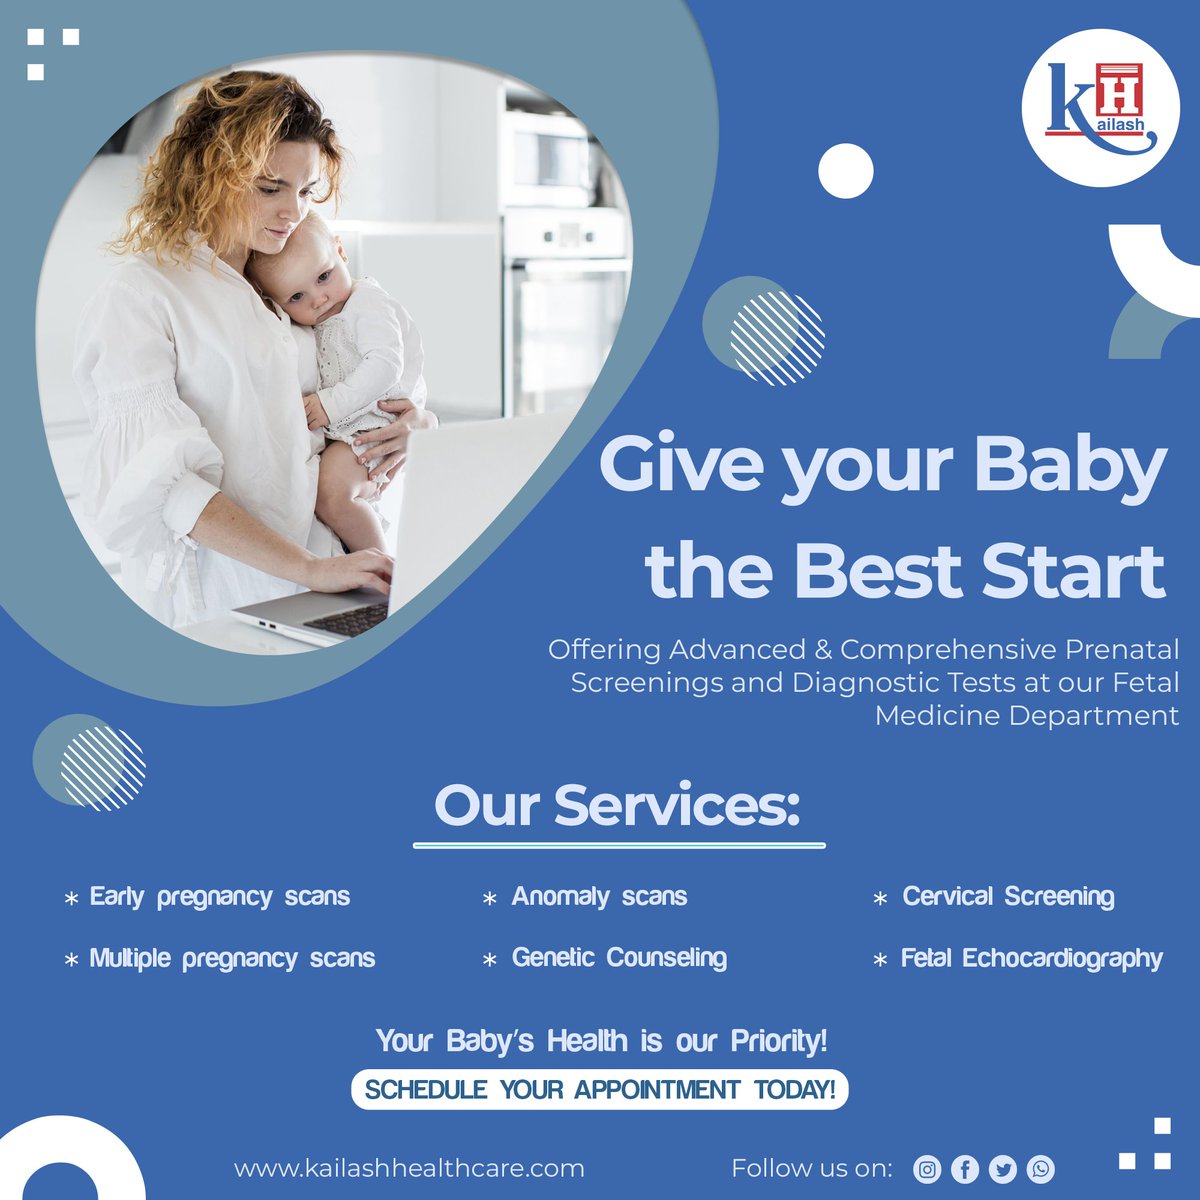 Planning pregnancy? Consider fetal medicine for comprehensive care & a healthy start for your precious one. #FetalMedicine helps ensure the health of both you & your baby.

Get personalized advice by our Fetal Medicine experts: kailashhealthcare.com

#PrenatalCare